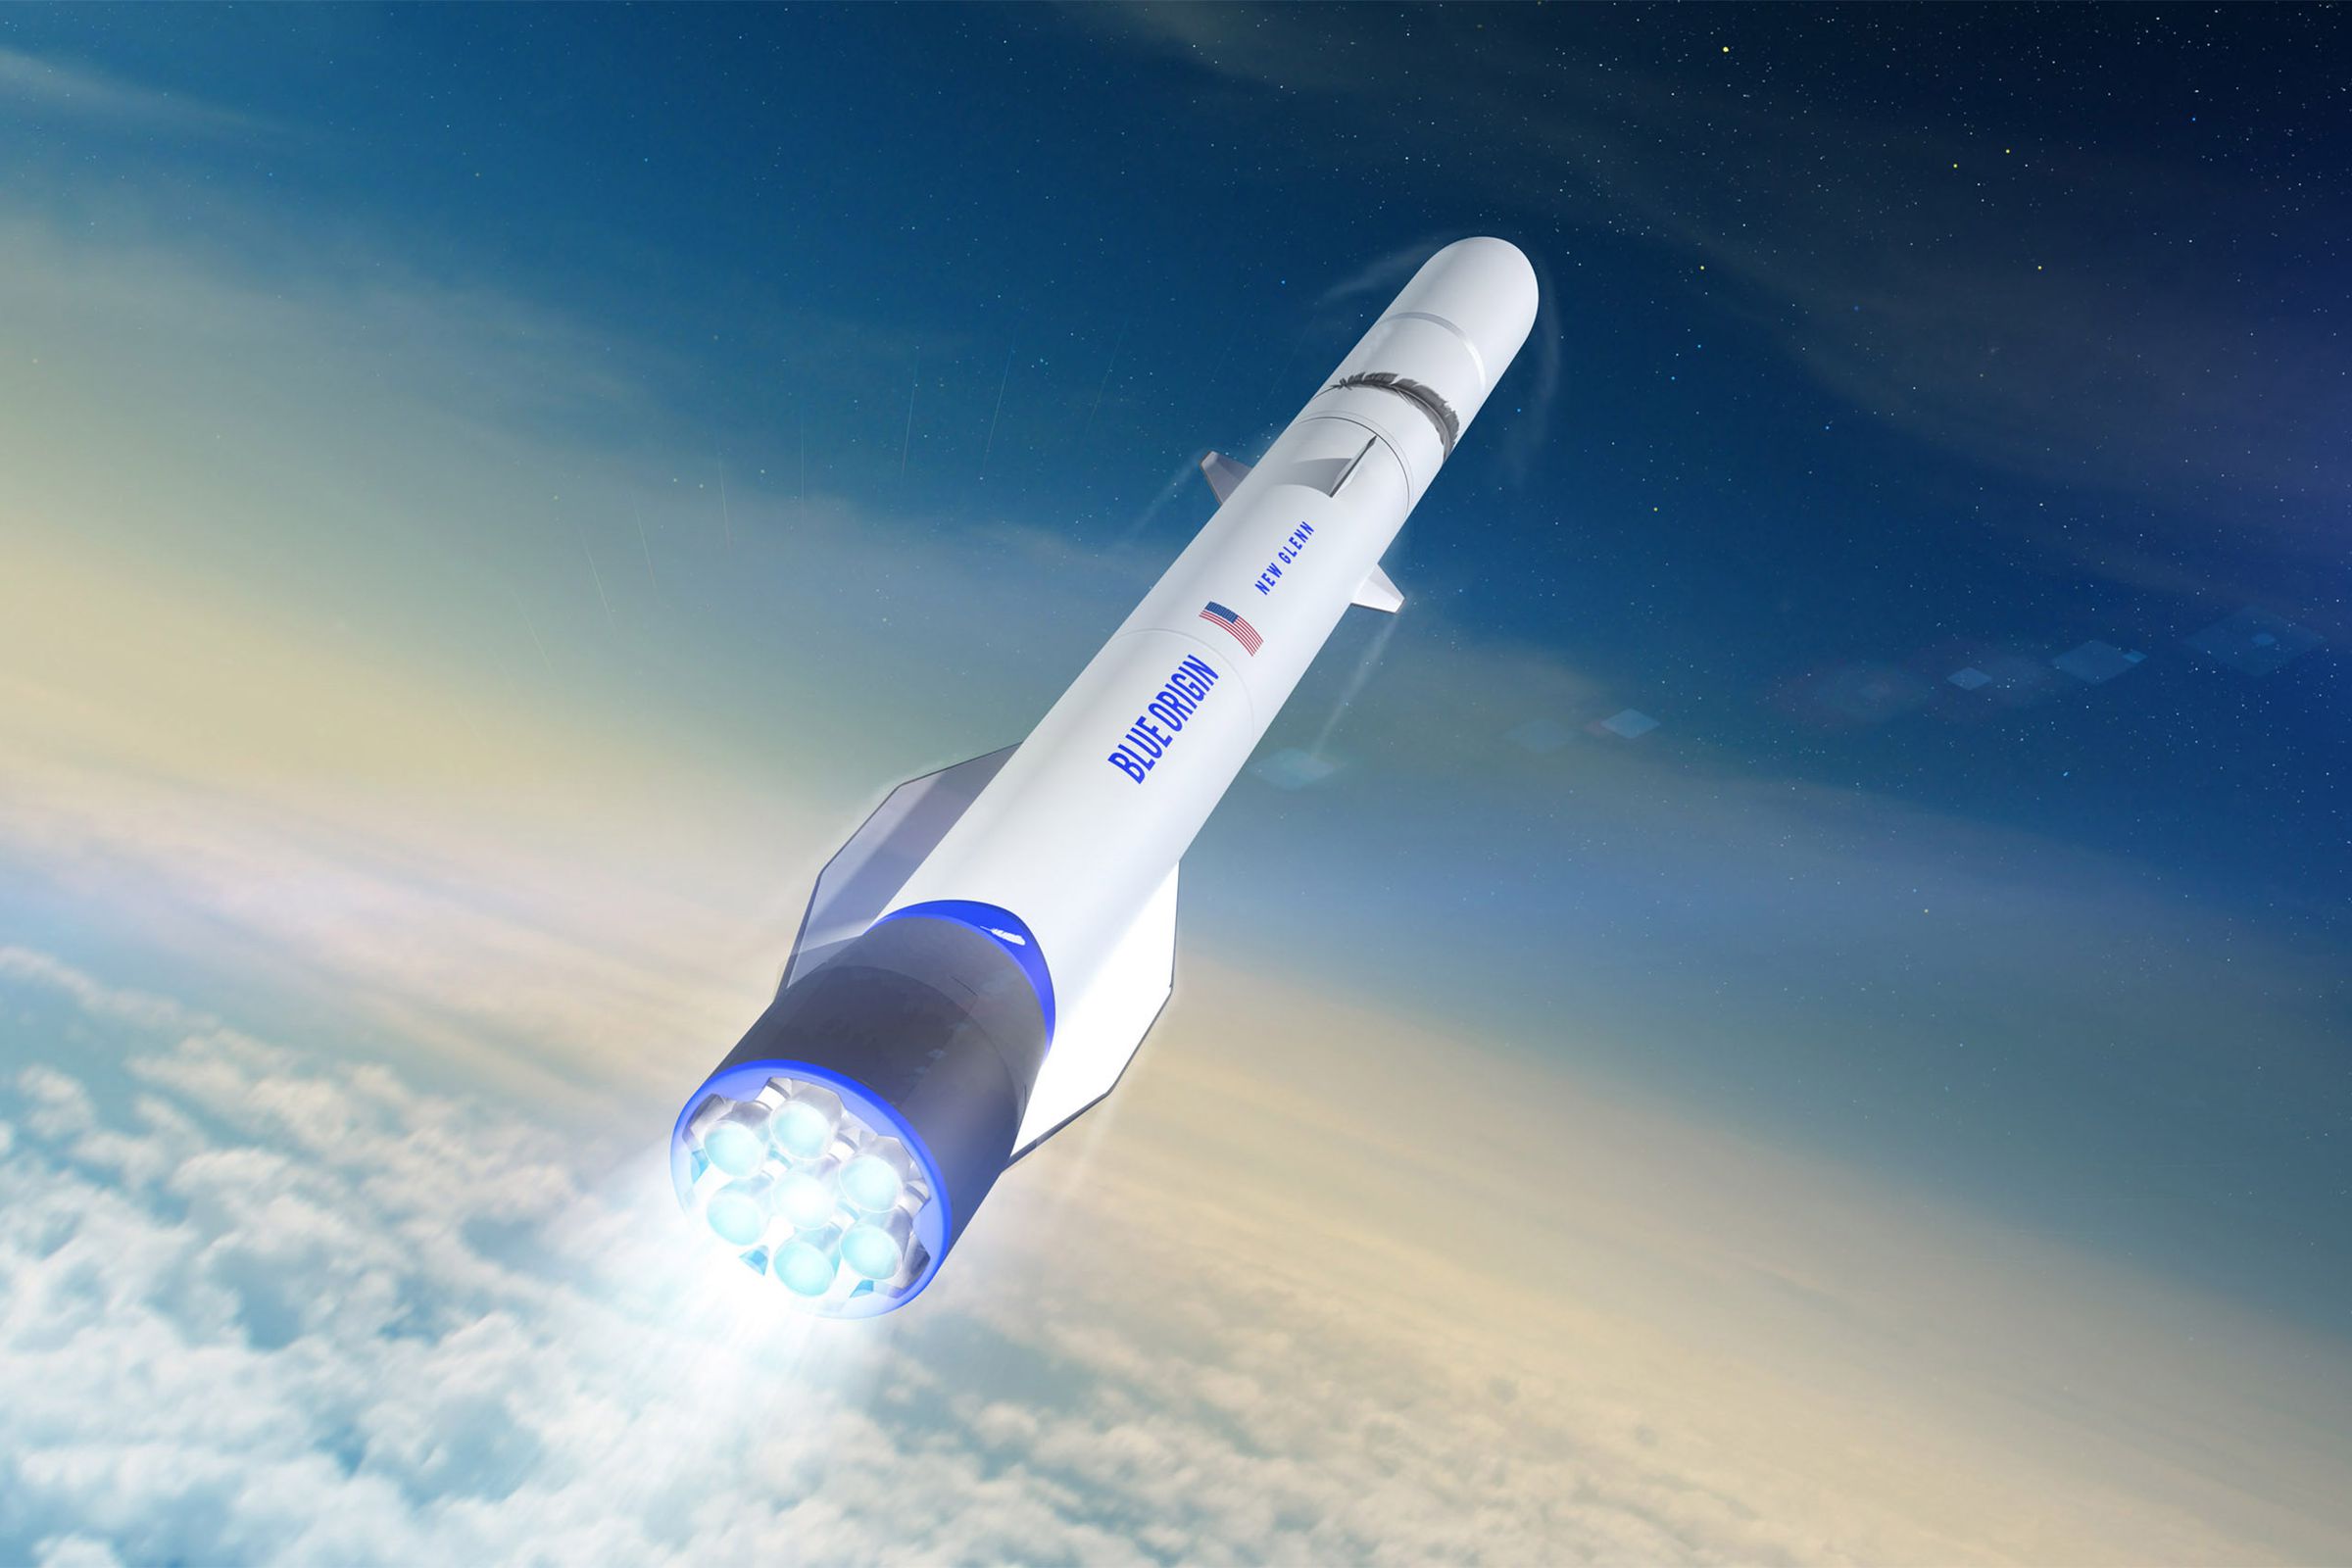 An animation of Blue Origin’s New Glenn launch vehicle, which is supposed to fly for the first time in 2021